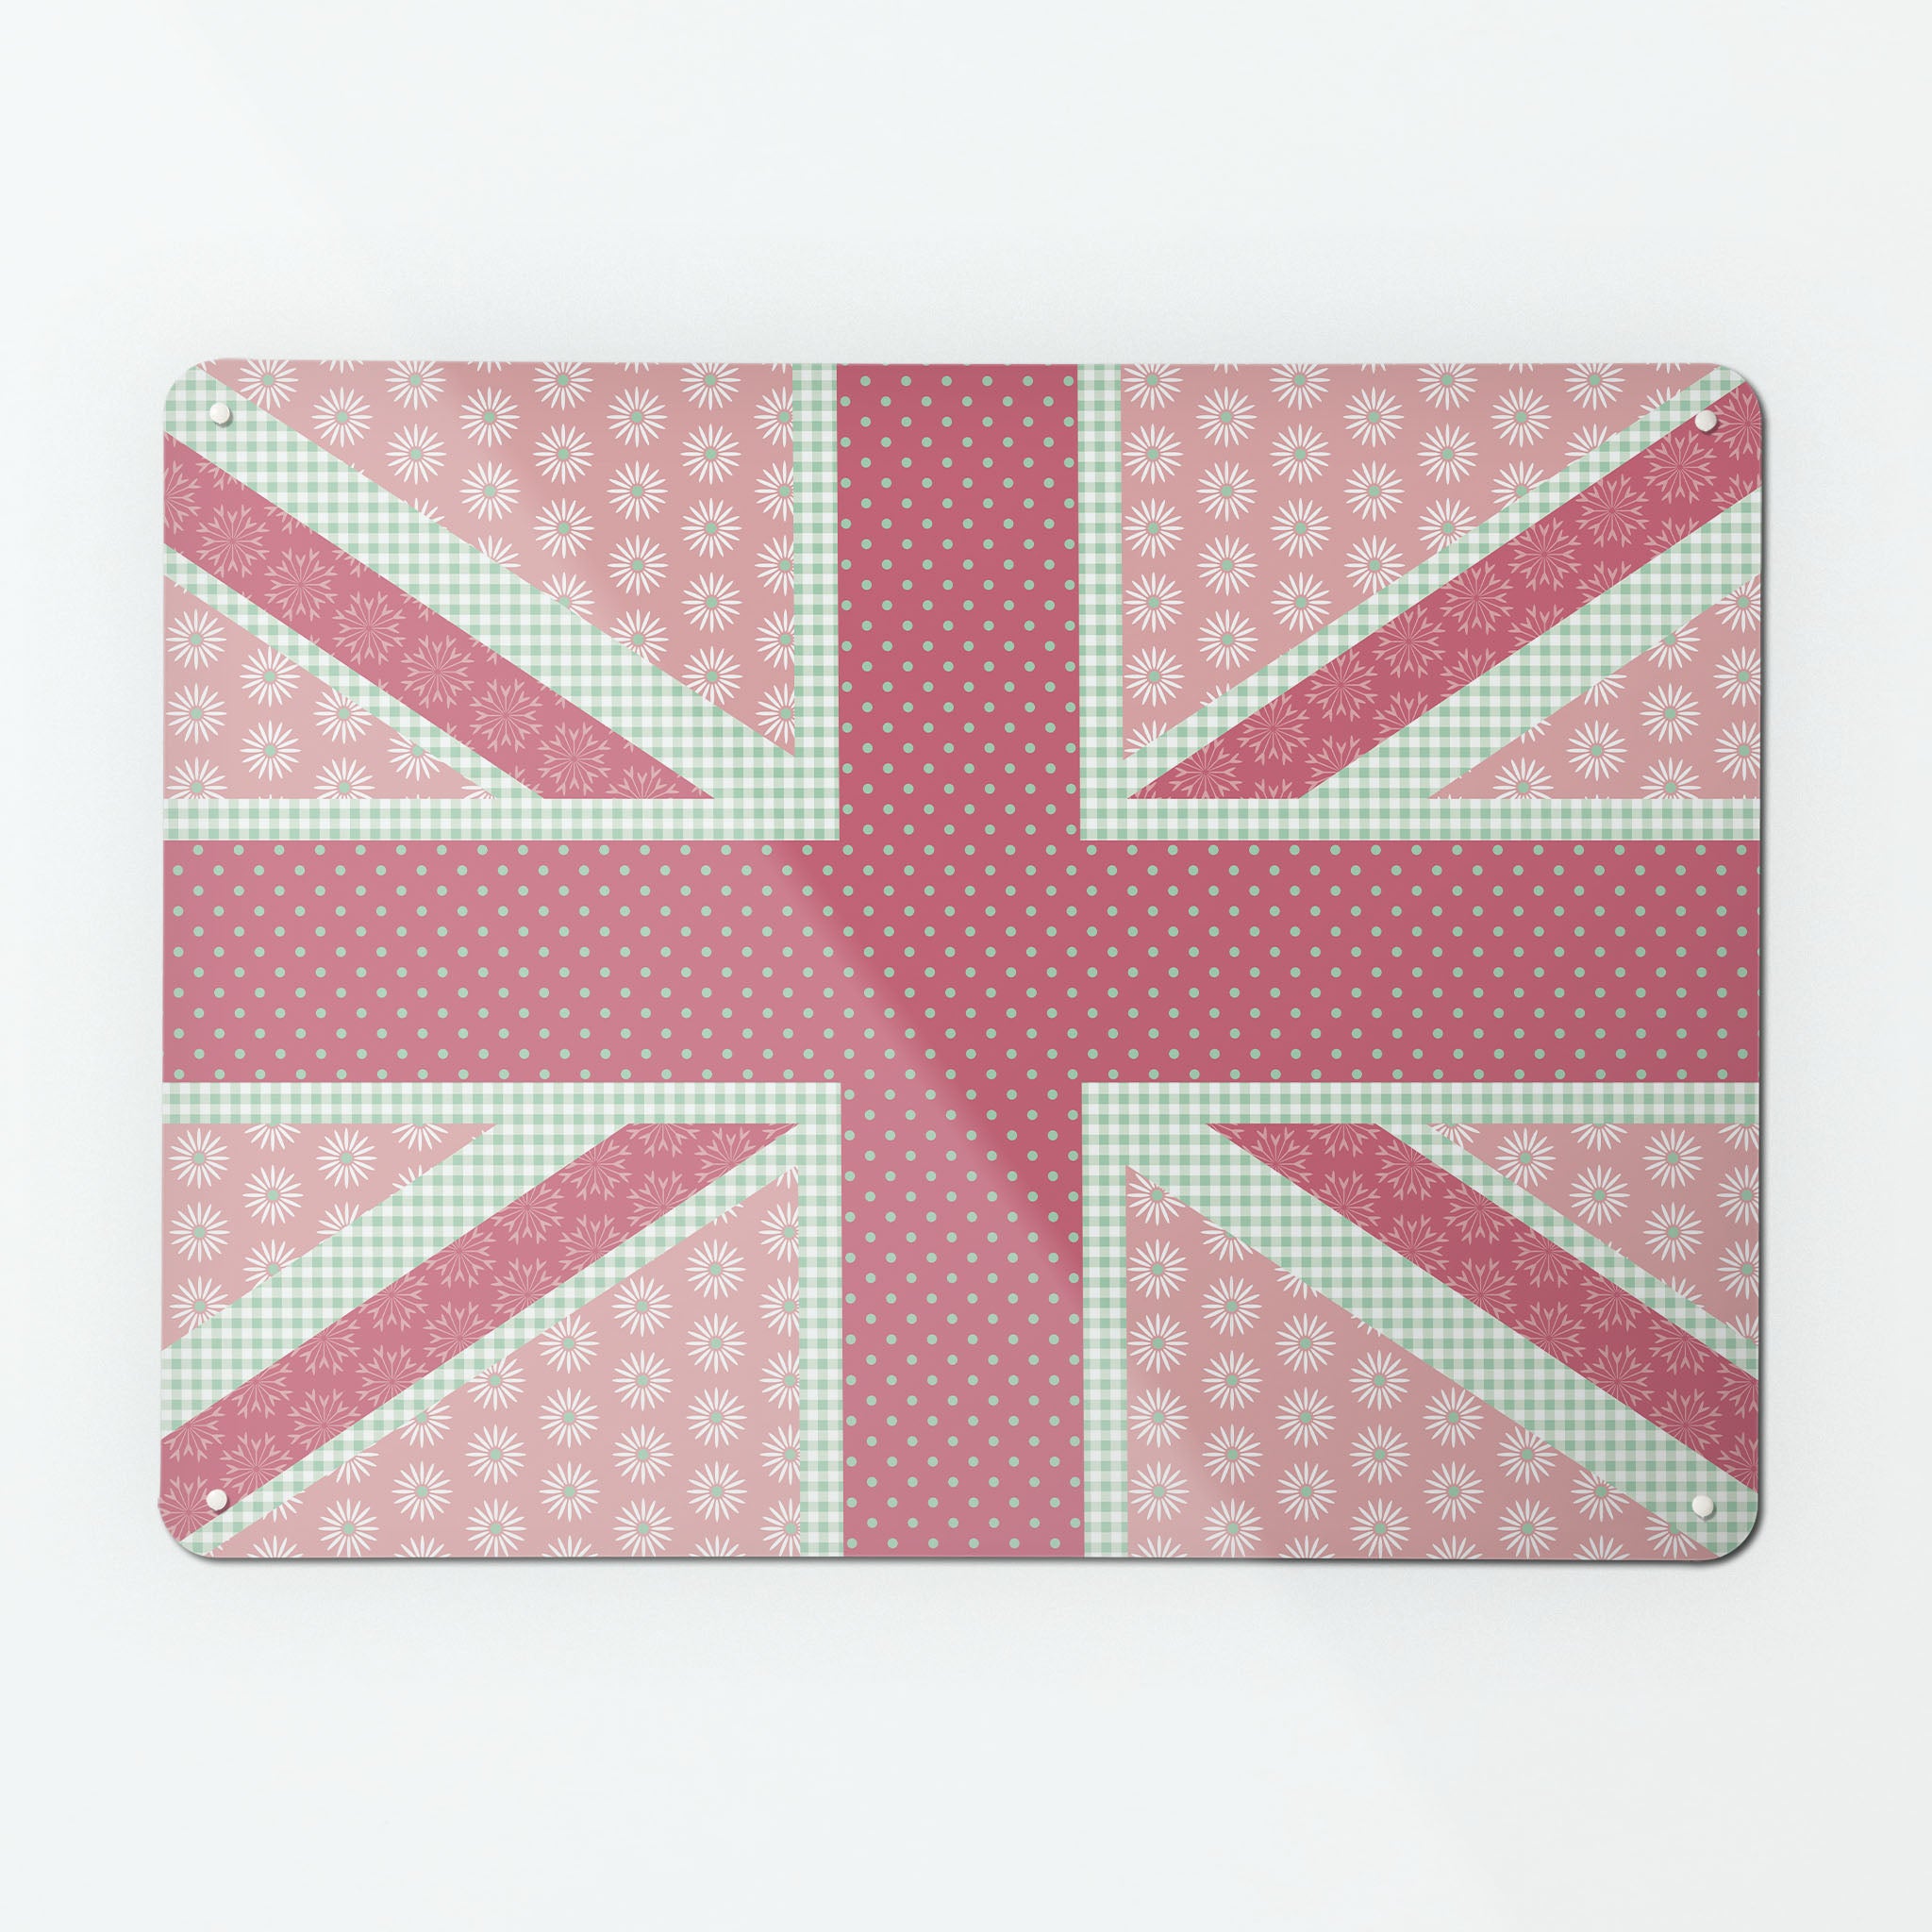 A large magnetic notice board by Beyond the Fridge with a Cool Britannia Union Jack design in pink and green